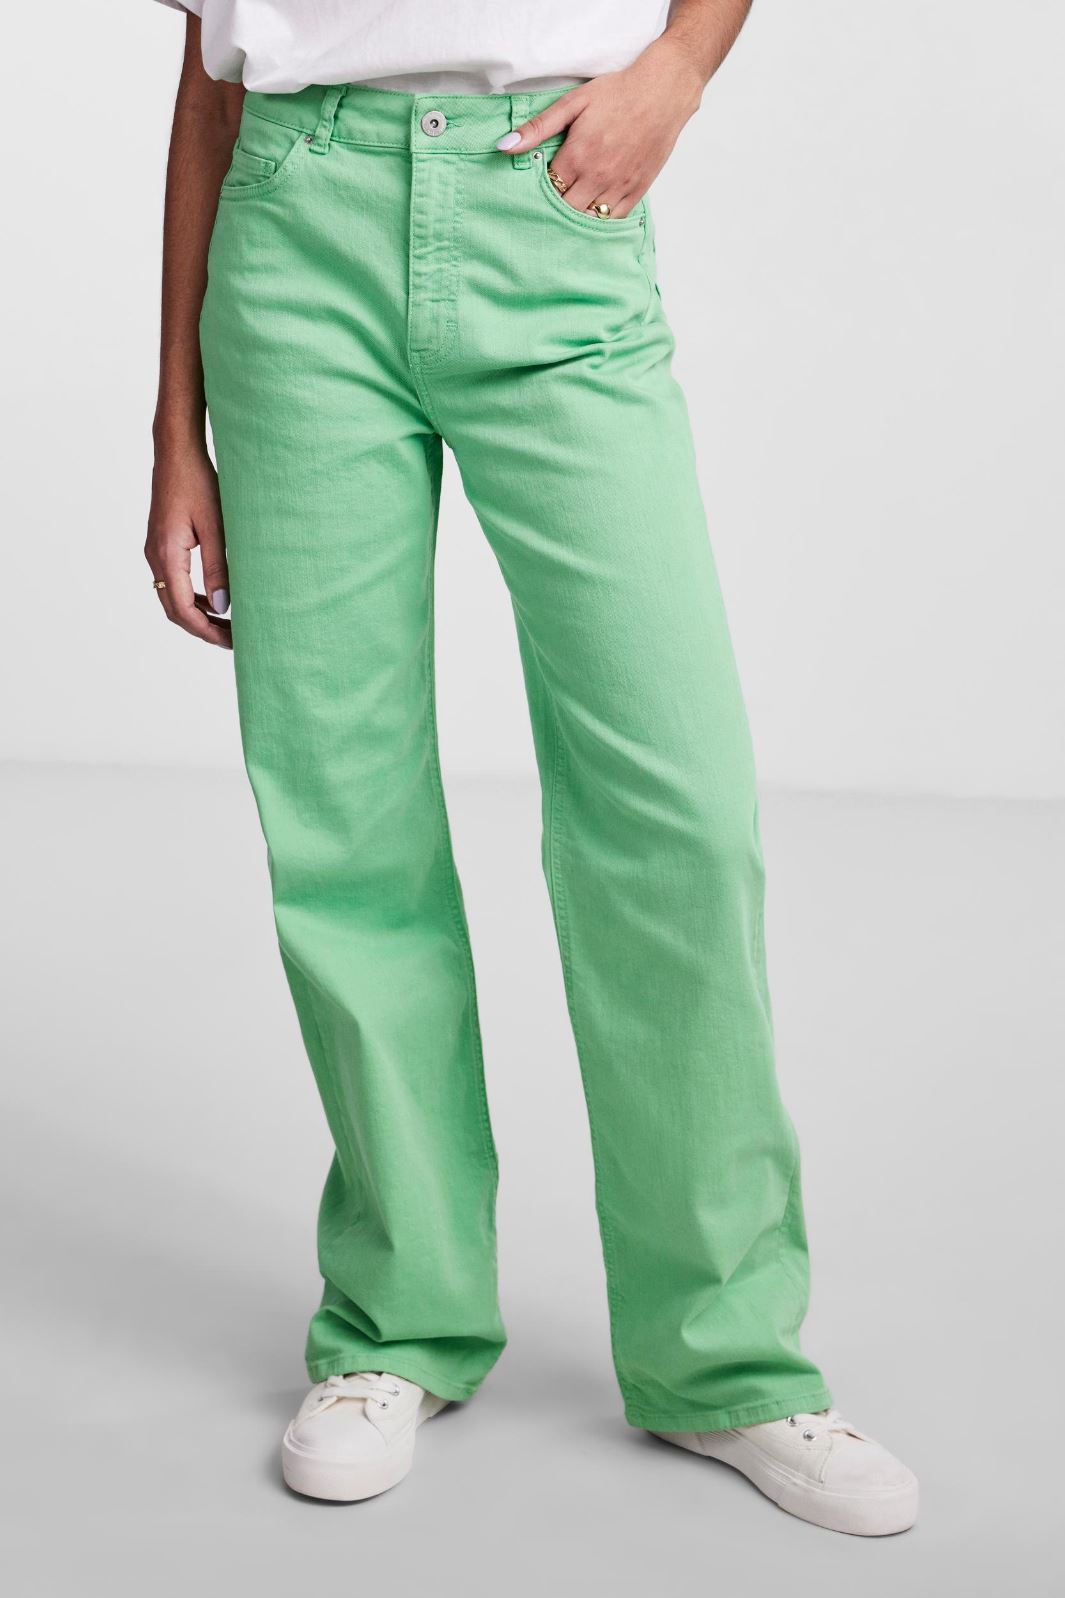 Pieces - Pcholly Hw Wide Jeans - Absinthe Green Bukser 